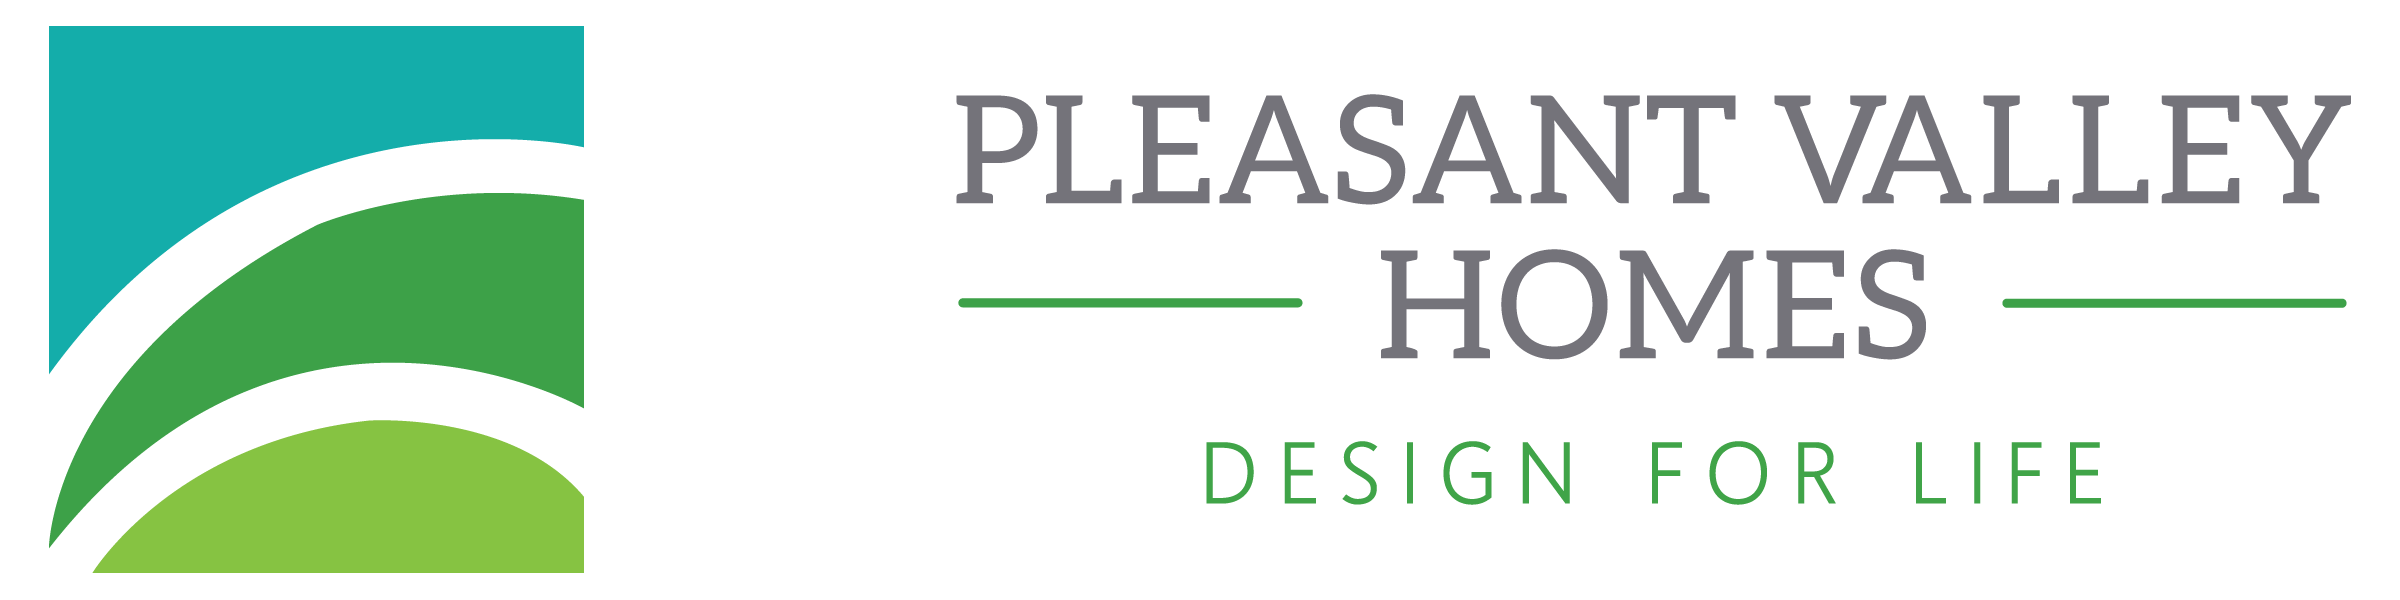 Pleasant Valley Homes